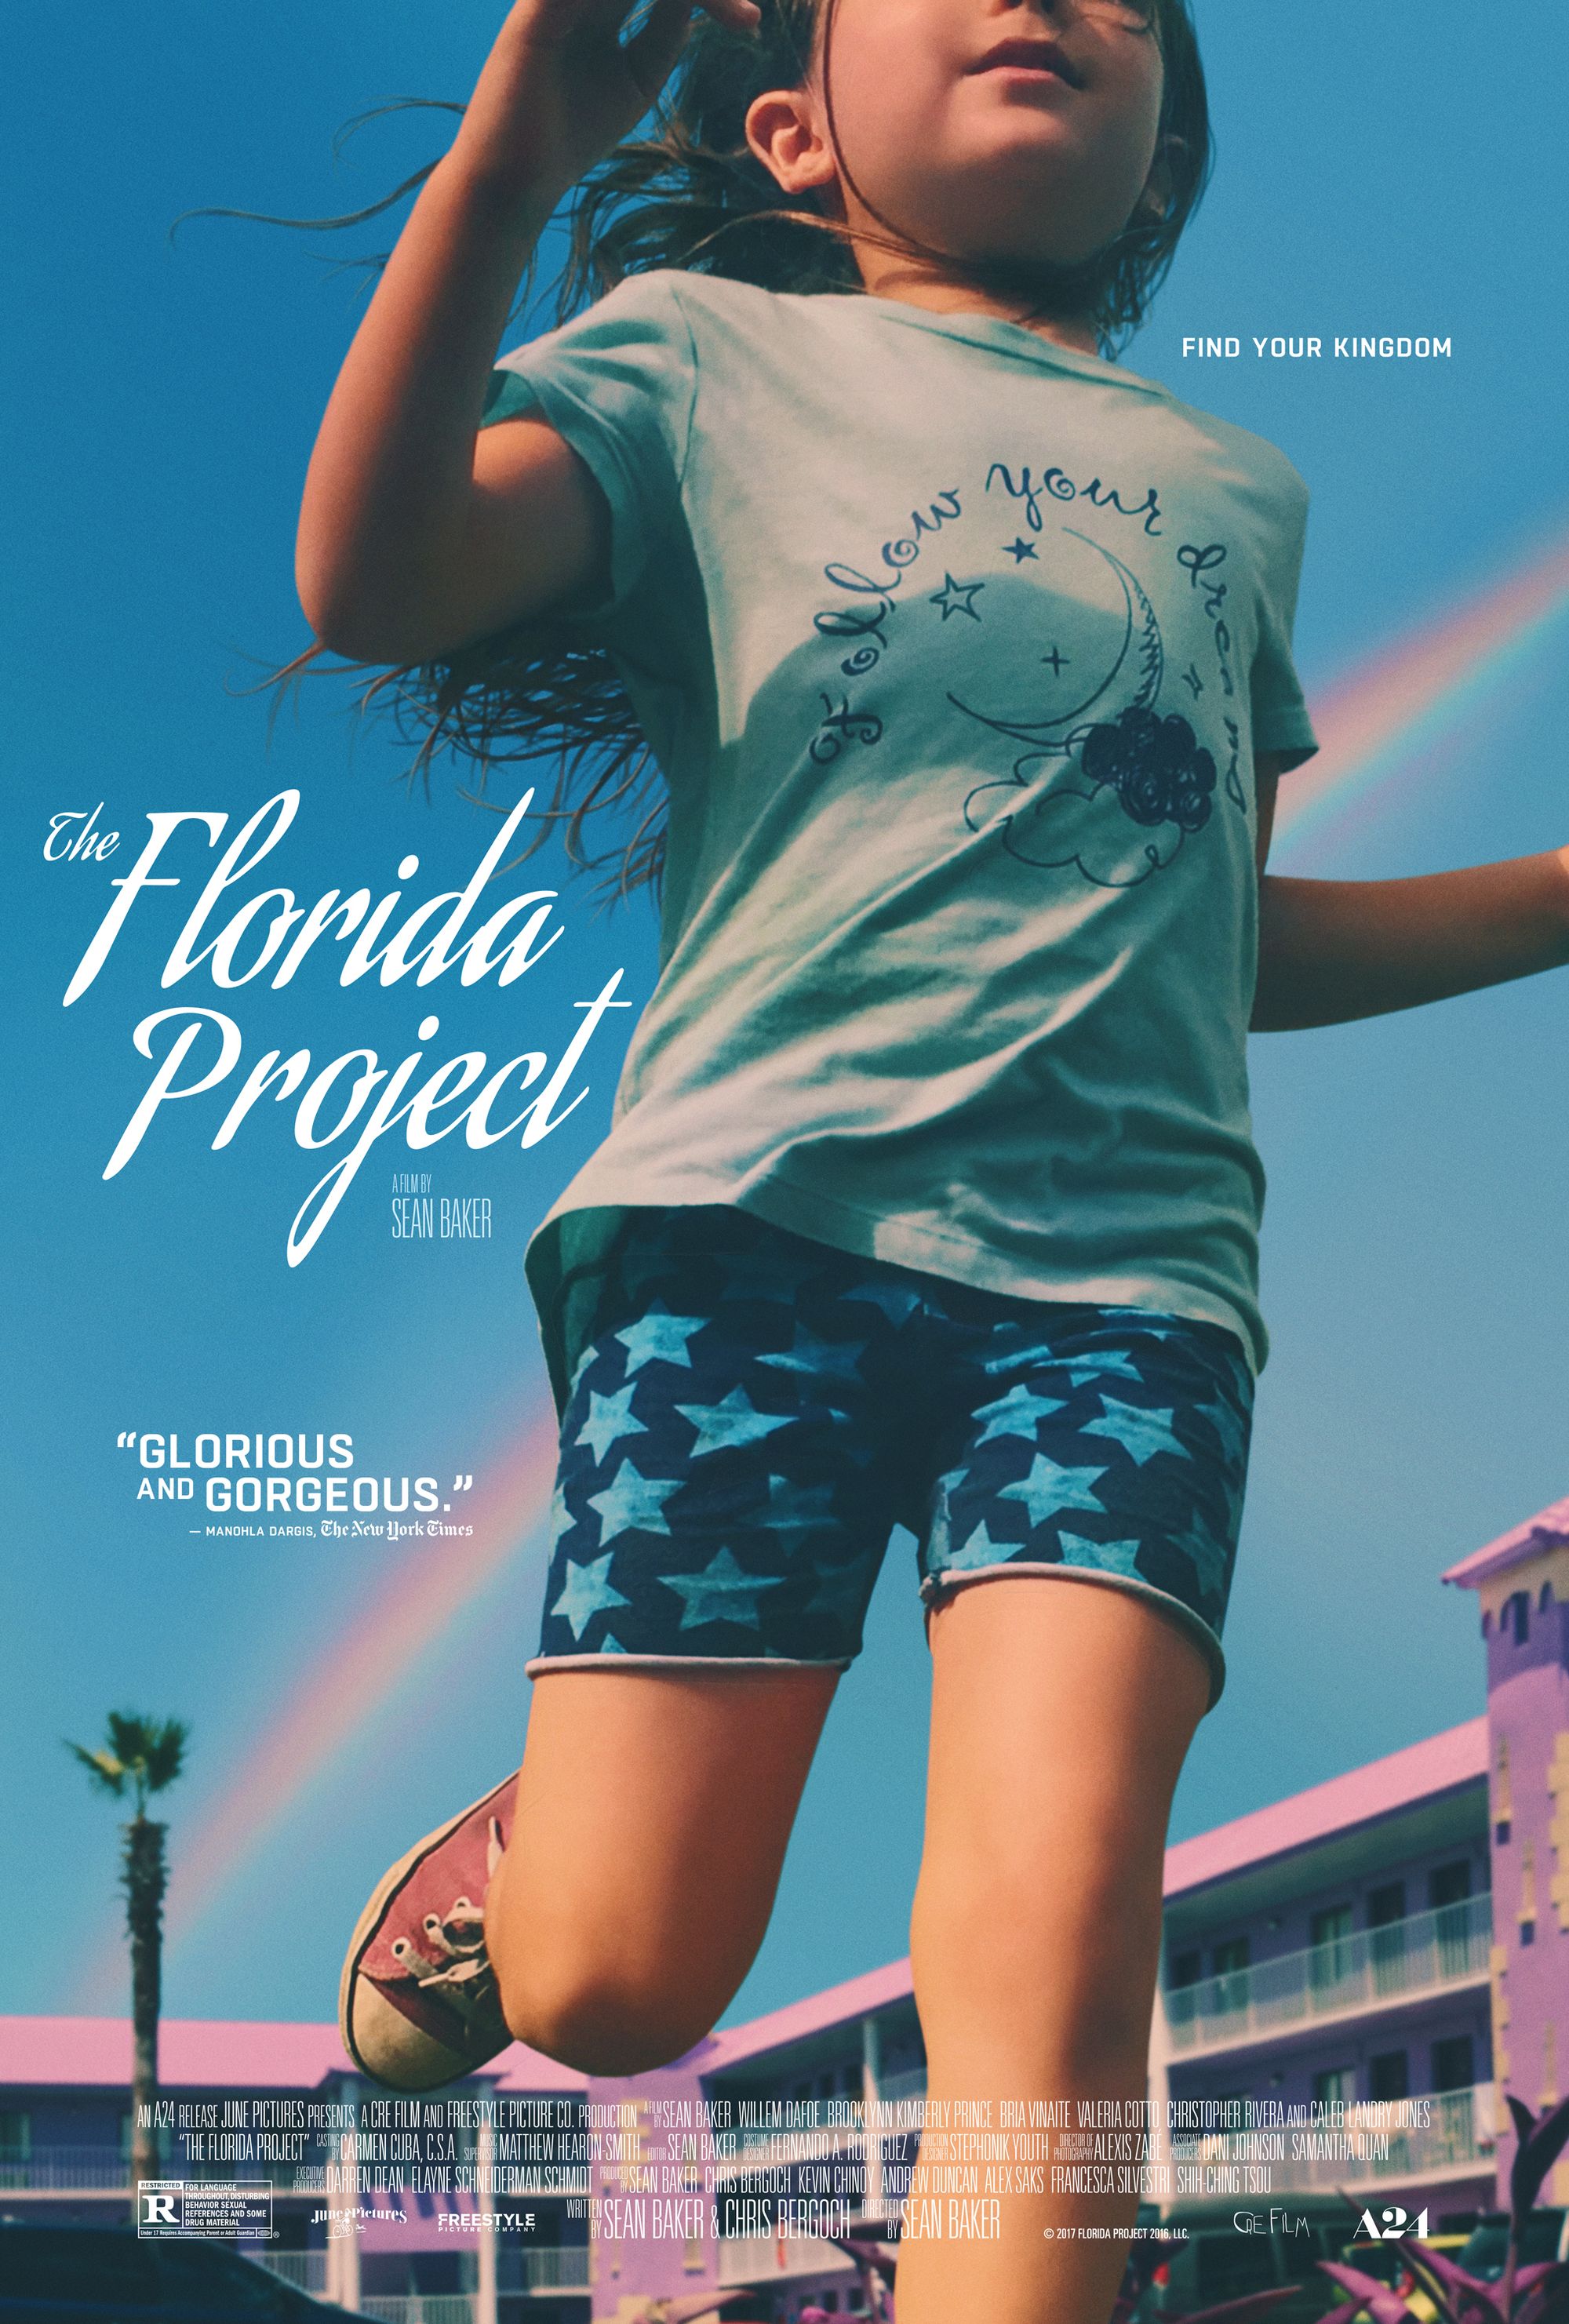 A Glimpse of Childhood: A Review of The Florida Project (2017)